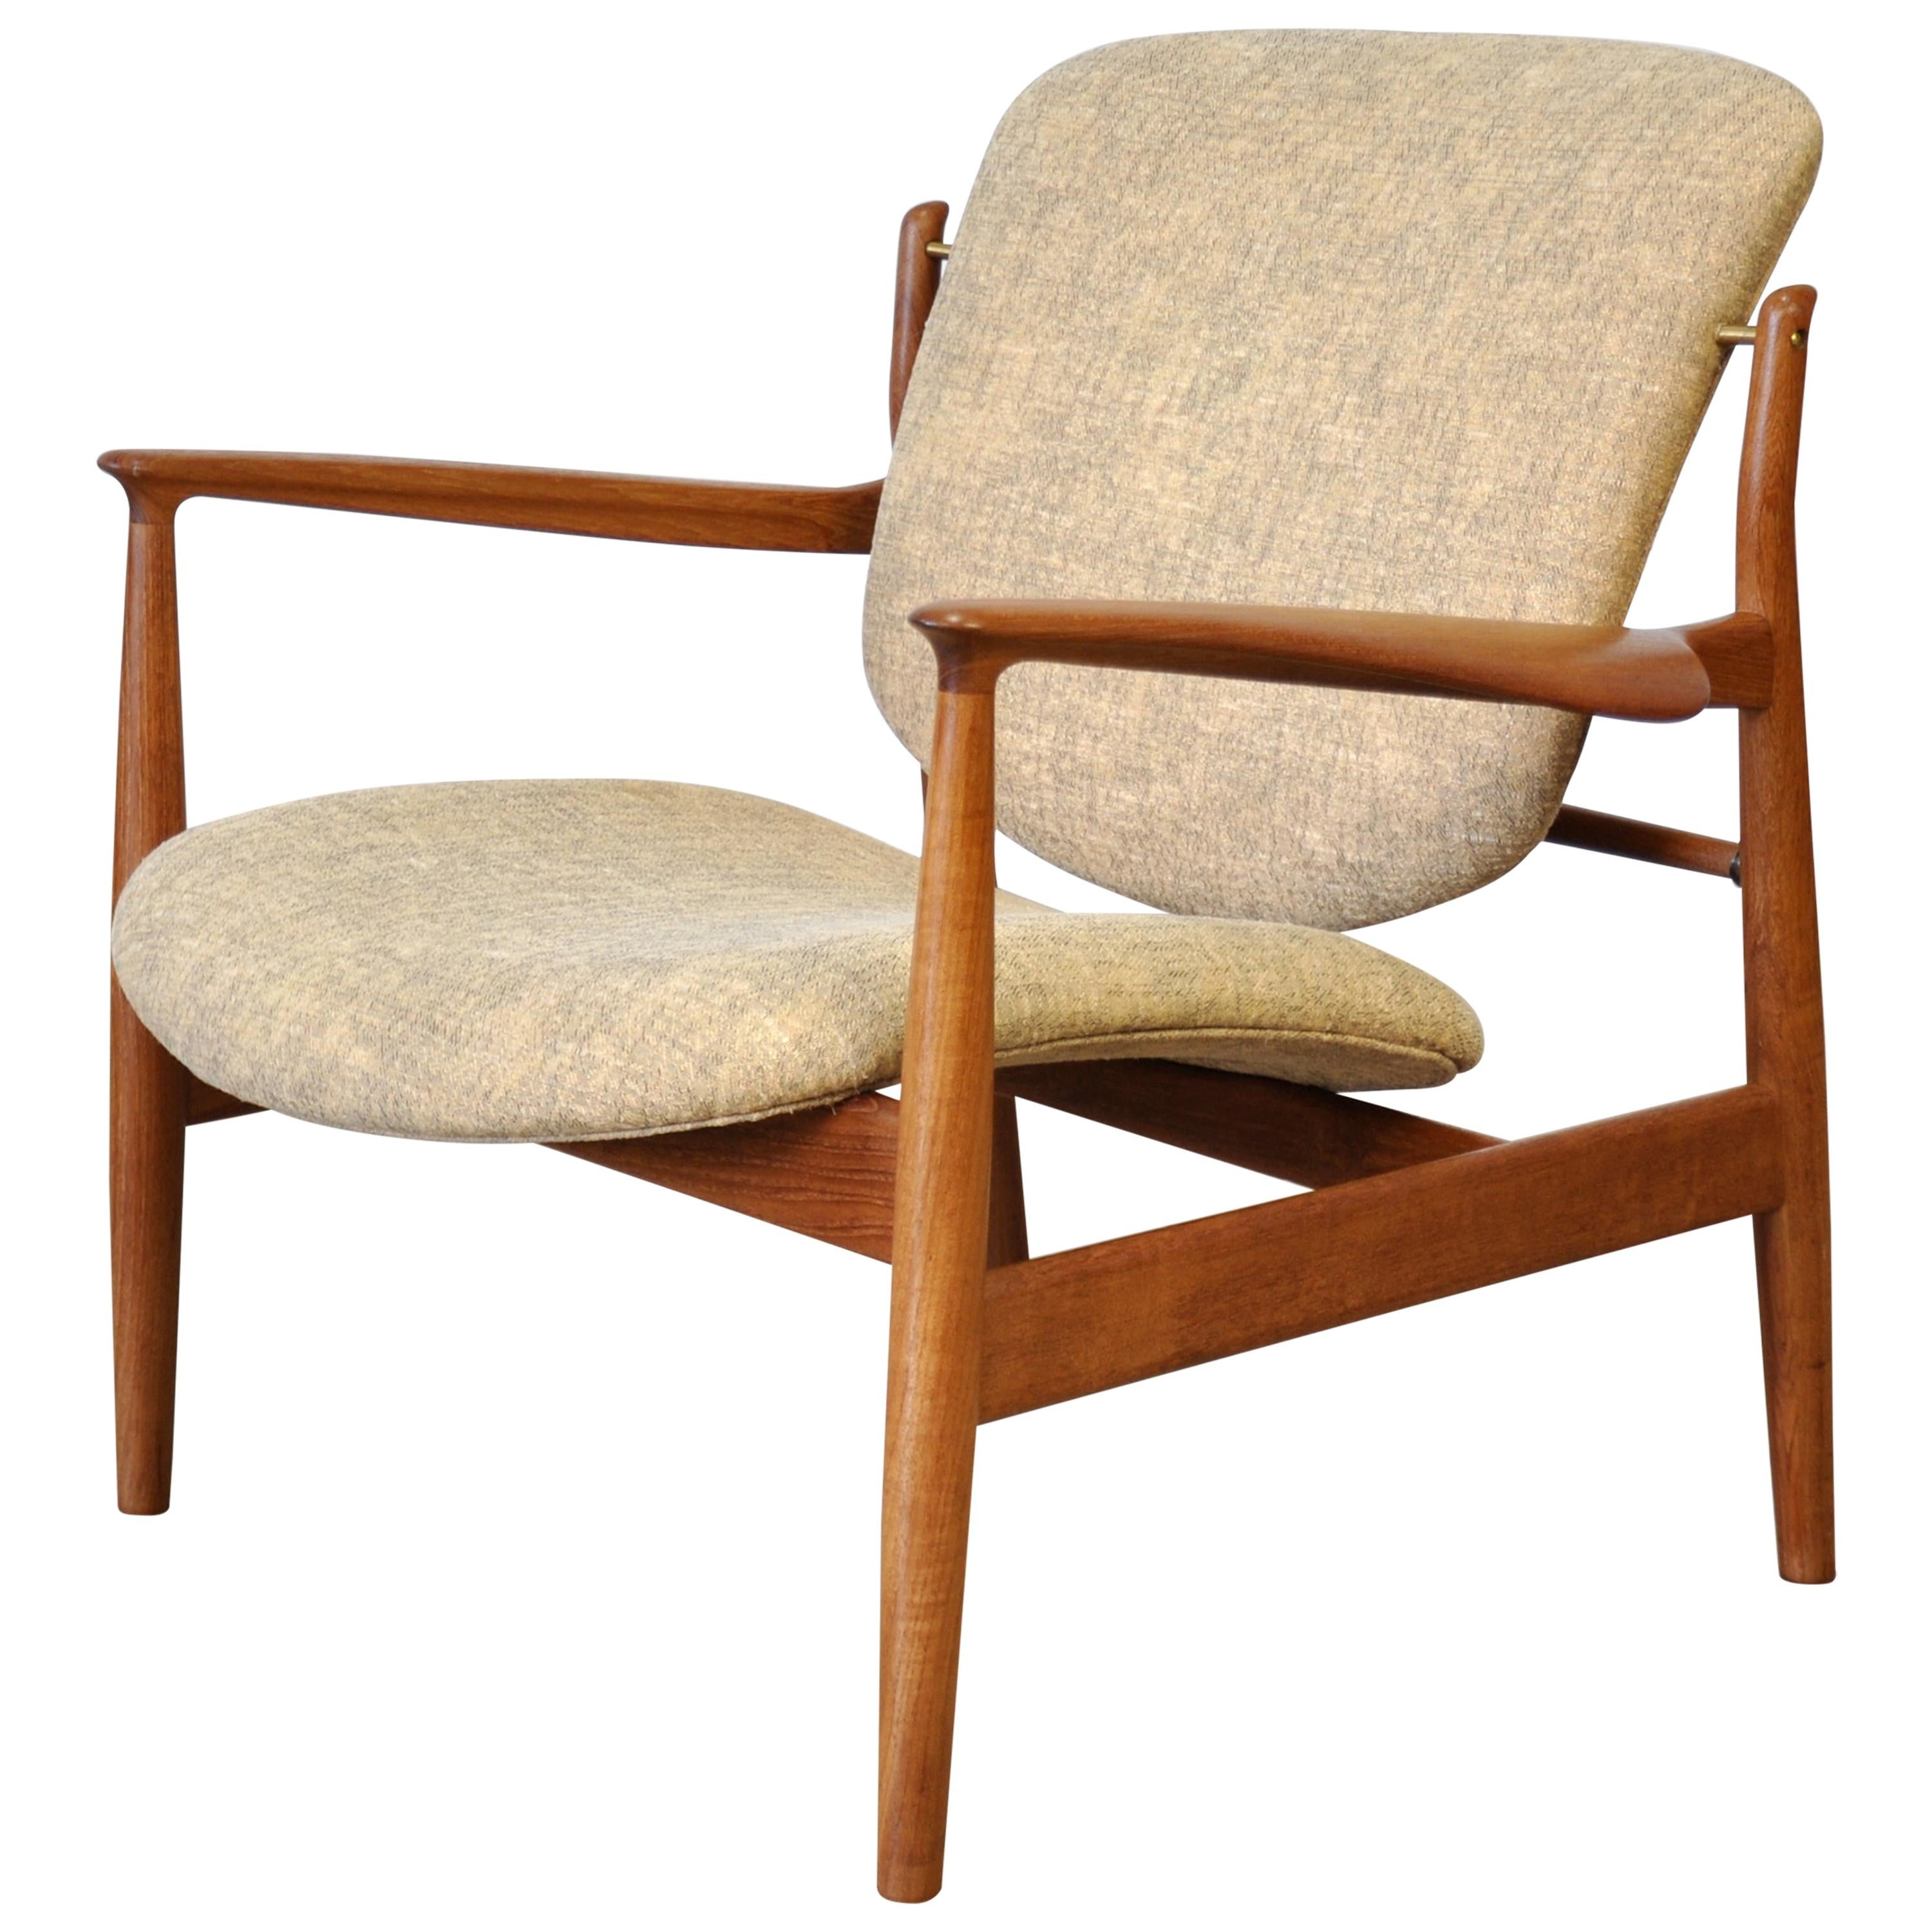 Iconic midcentury Danish modern FD136 vintage easy chair designed by Finn Juhl for France and Daverkosen (later renamed France and Son) dating from the 1950s. The splendidly sculpted teak open frame and the floating seat and back of this armchair